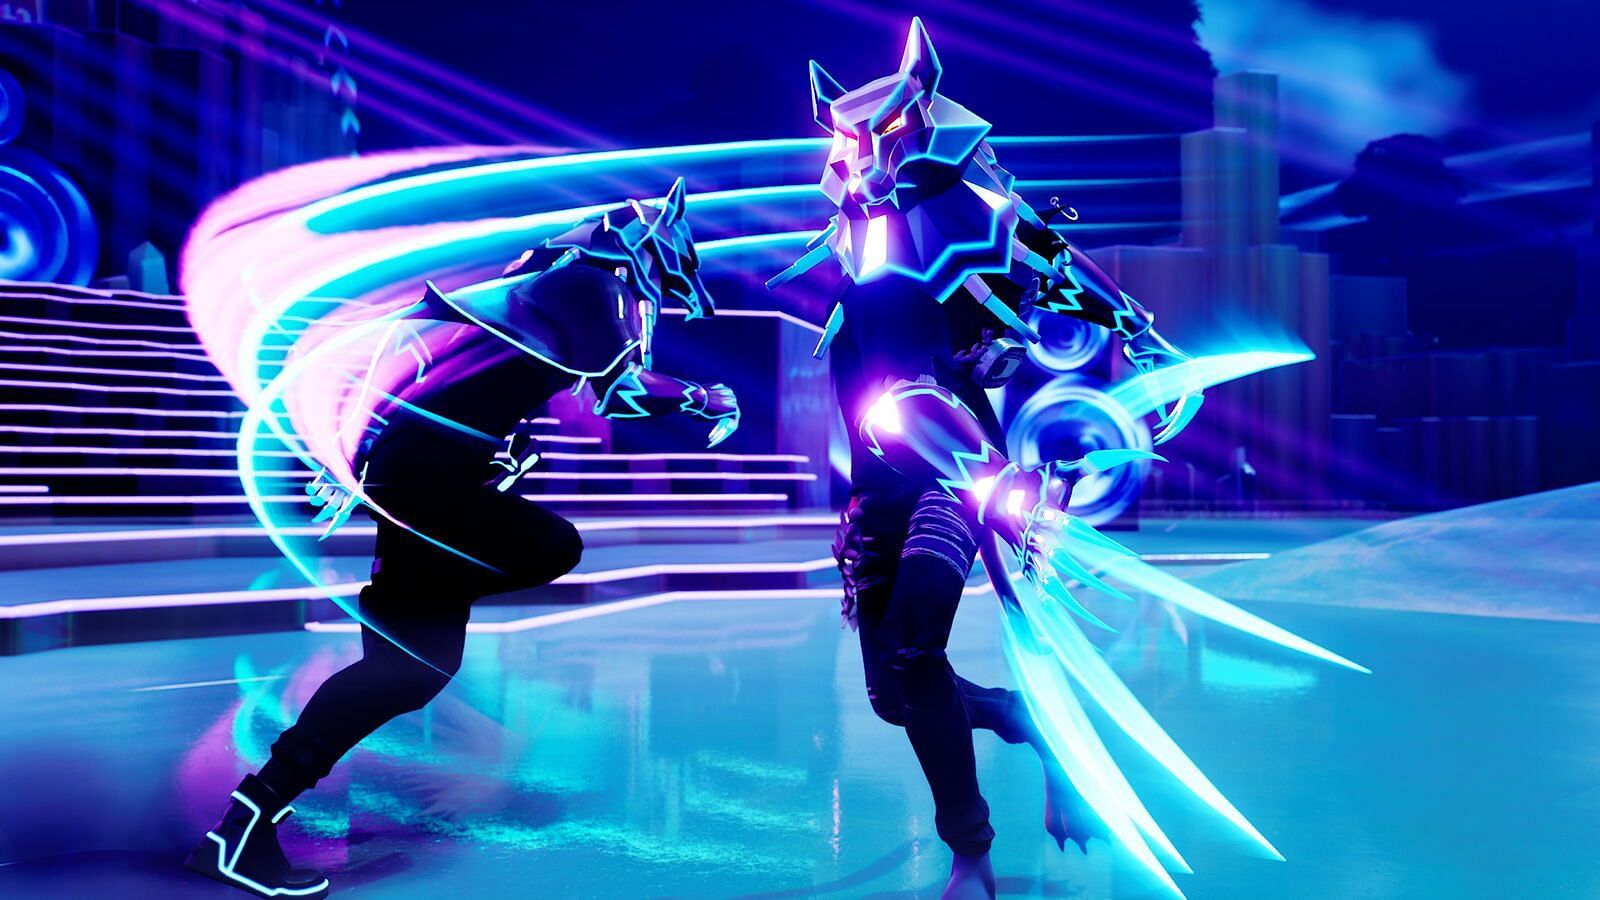 The Mythic Howler Claws were briefly removed from Fortnite Battle Royale (Image via Epic Games)